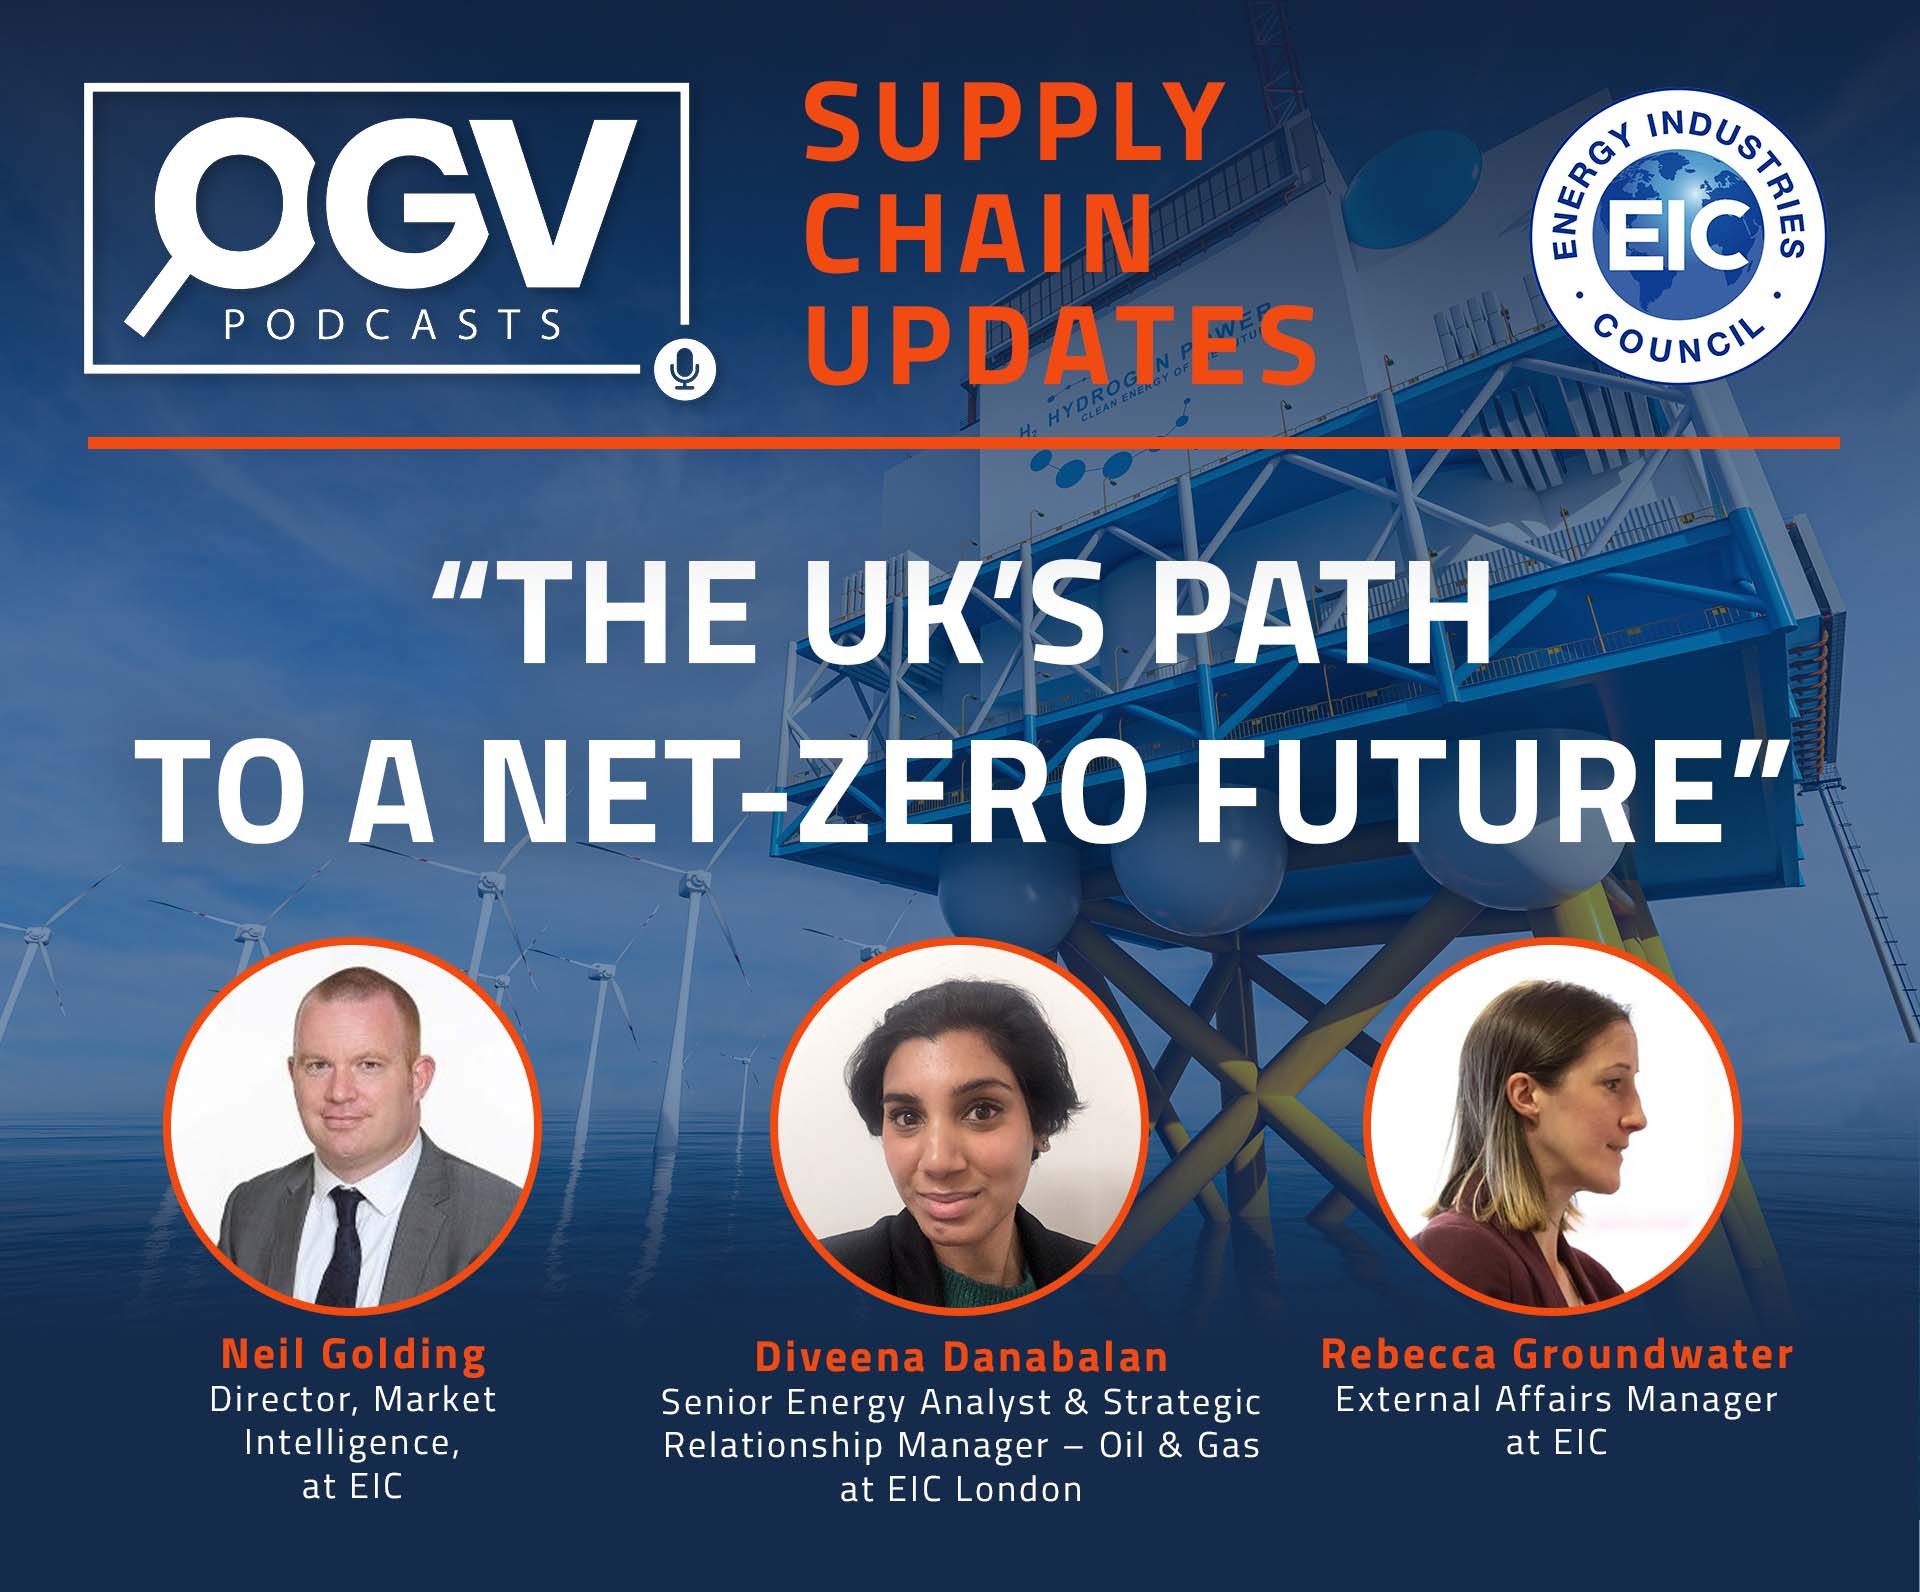 "The UK's Path to a Net-Zero Future" EIC Supply Chain Updates